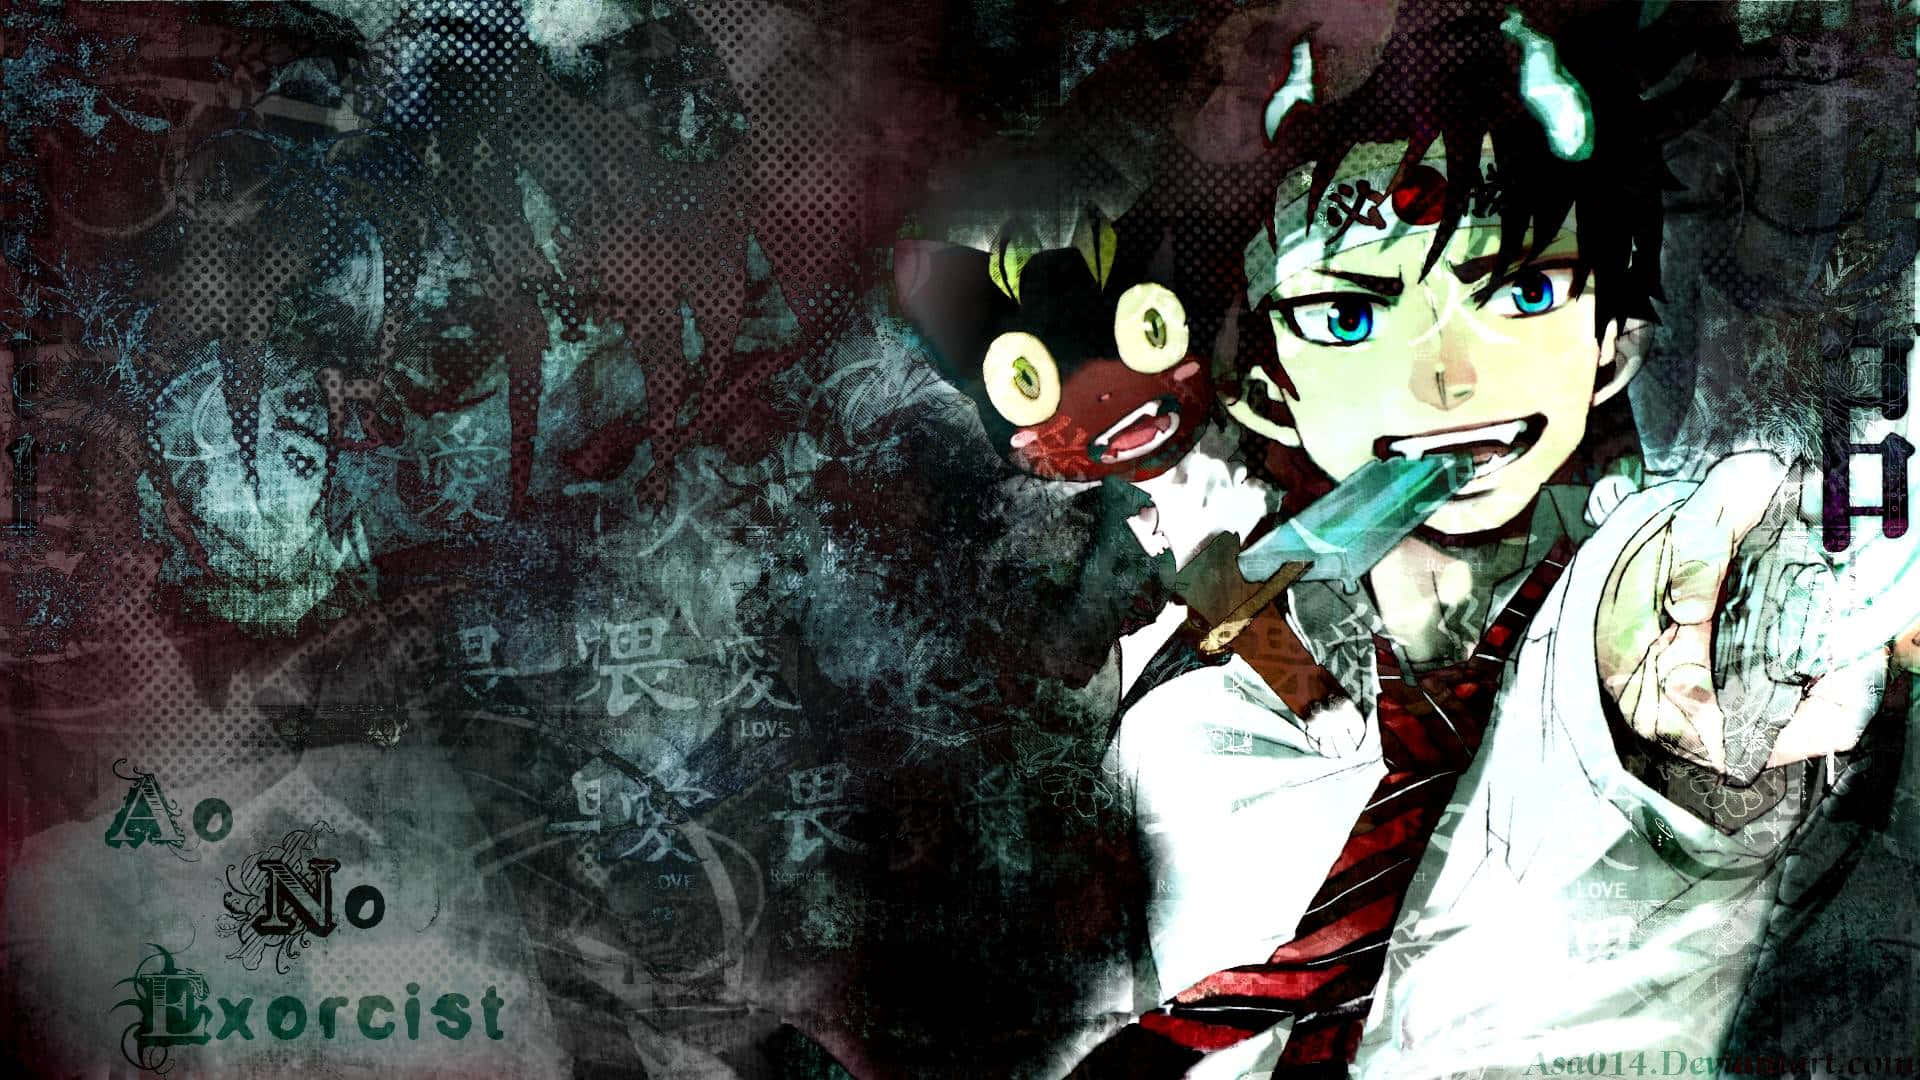 Uniting for a mission against evil: Rin and Yukio from Blue Exorcist